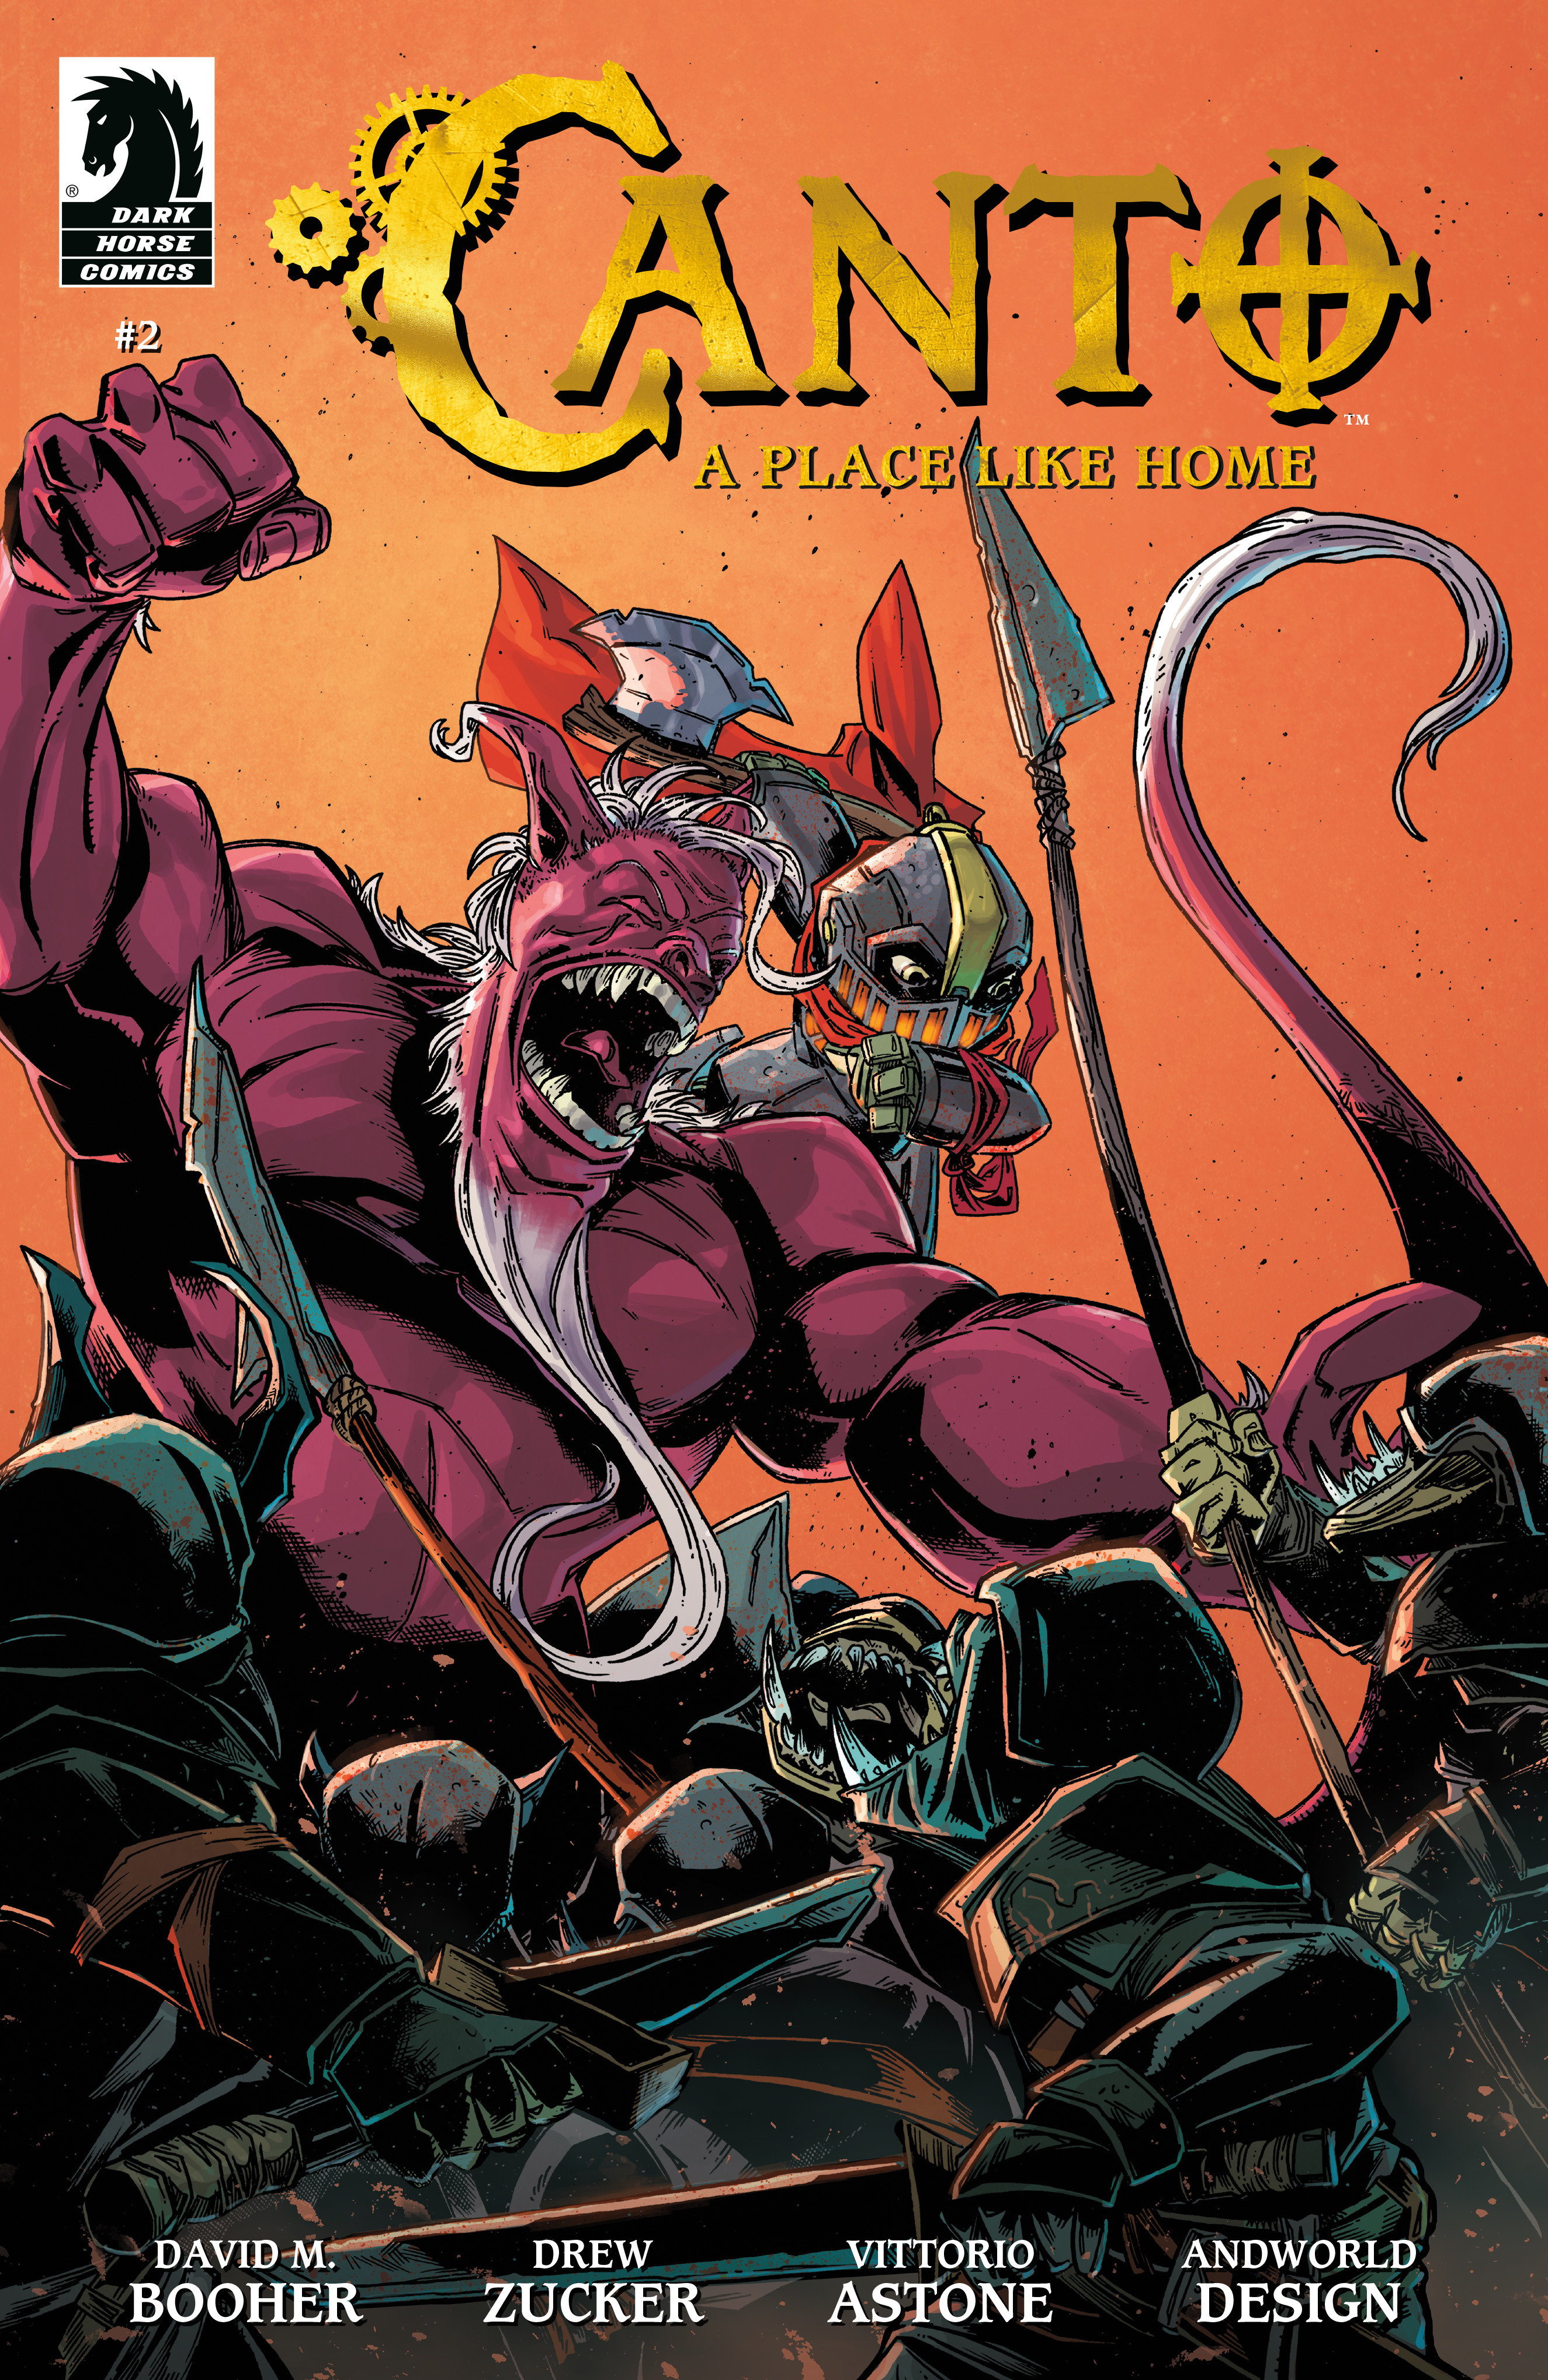 Canto: A Place Like Home #2 Cover A (Drew Zucker)